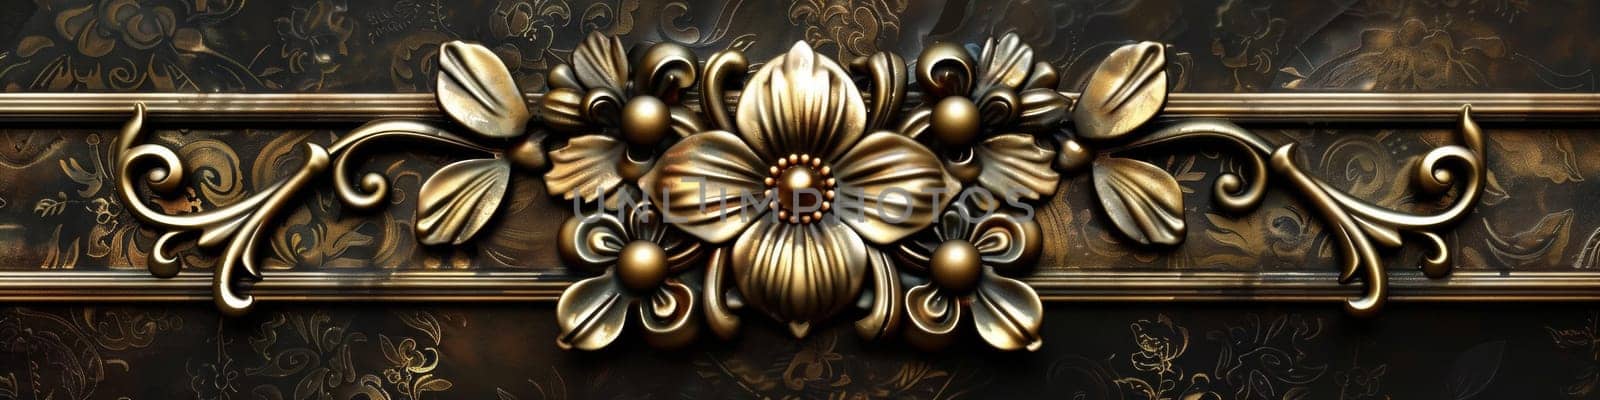 A decorative metal design on a wall with gold flowers